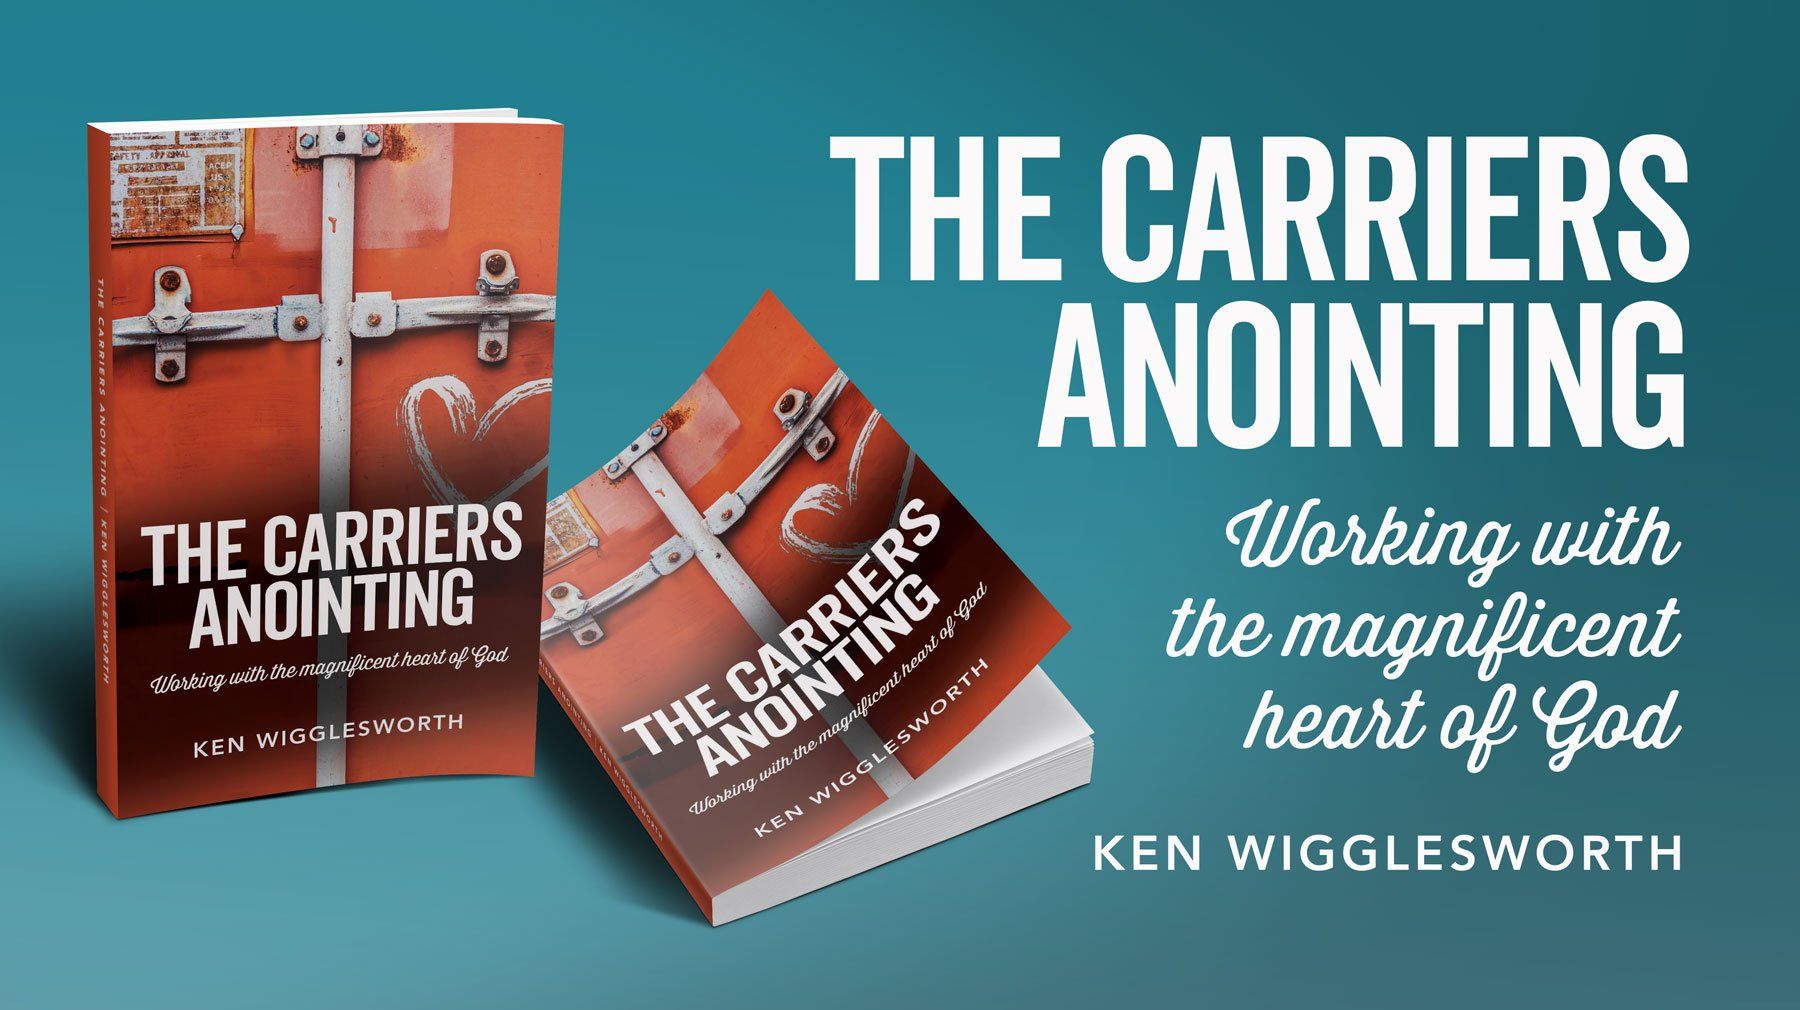 The Carriers Anointing